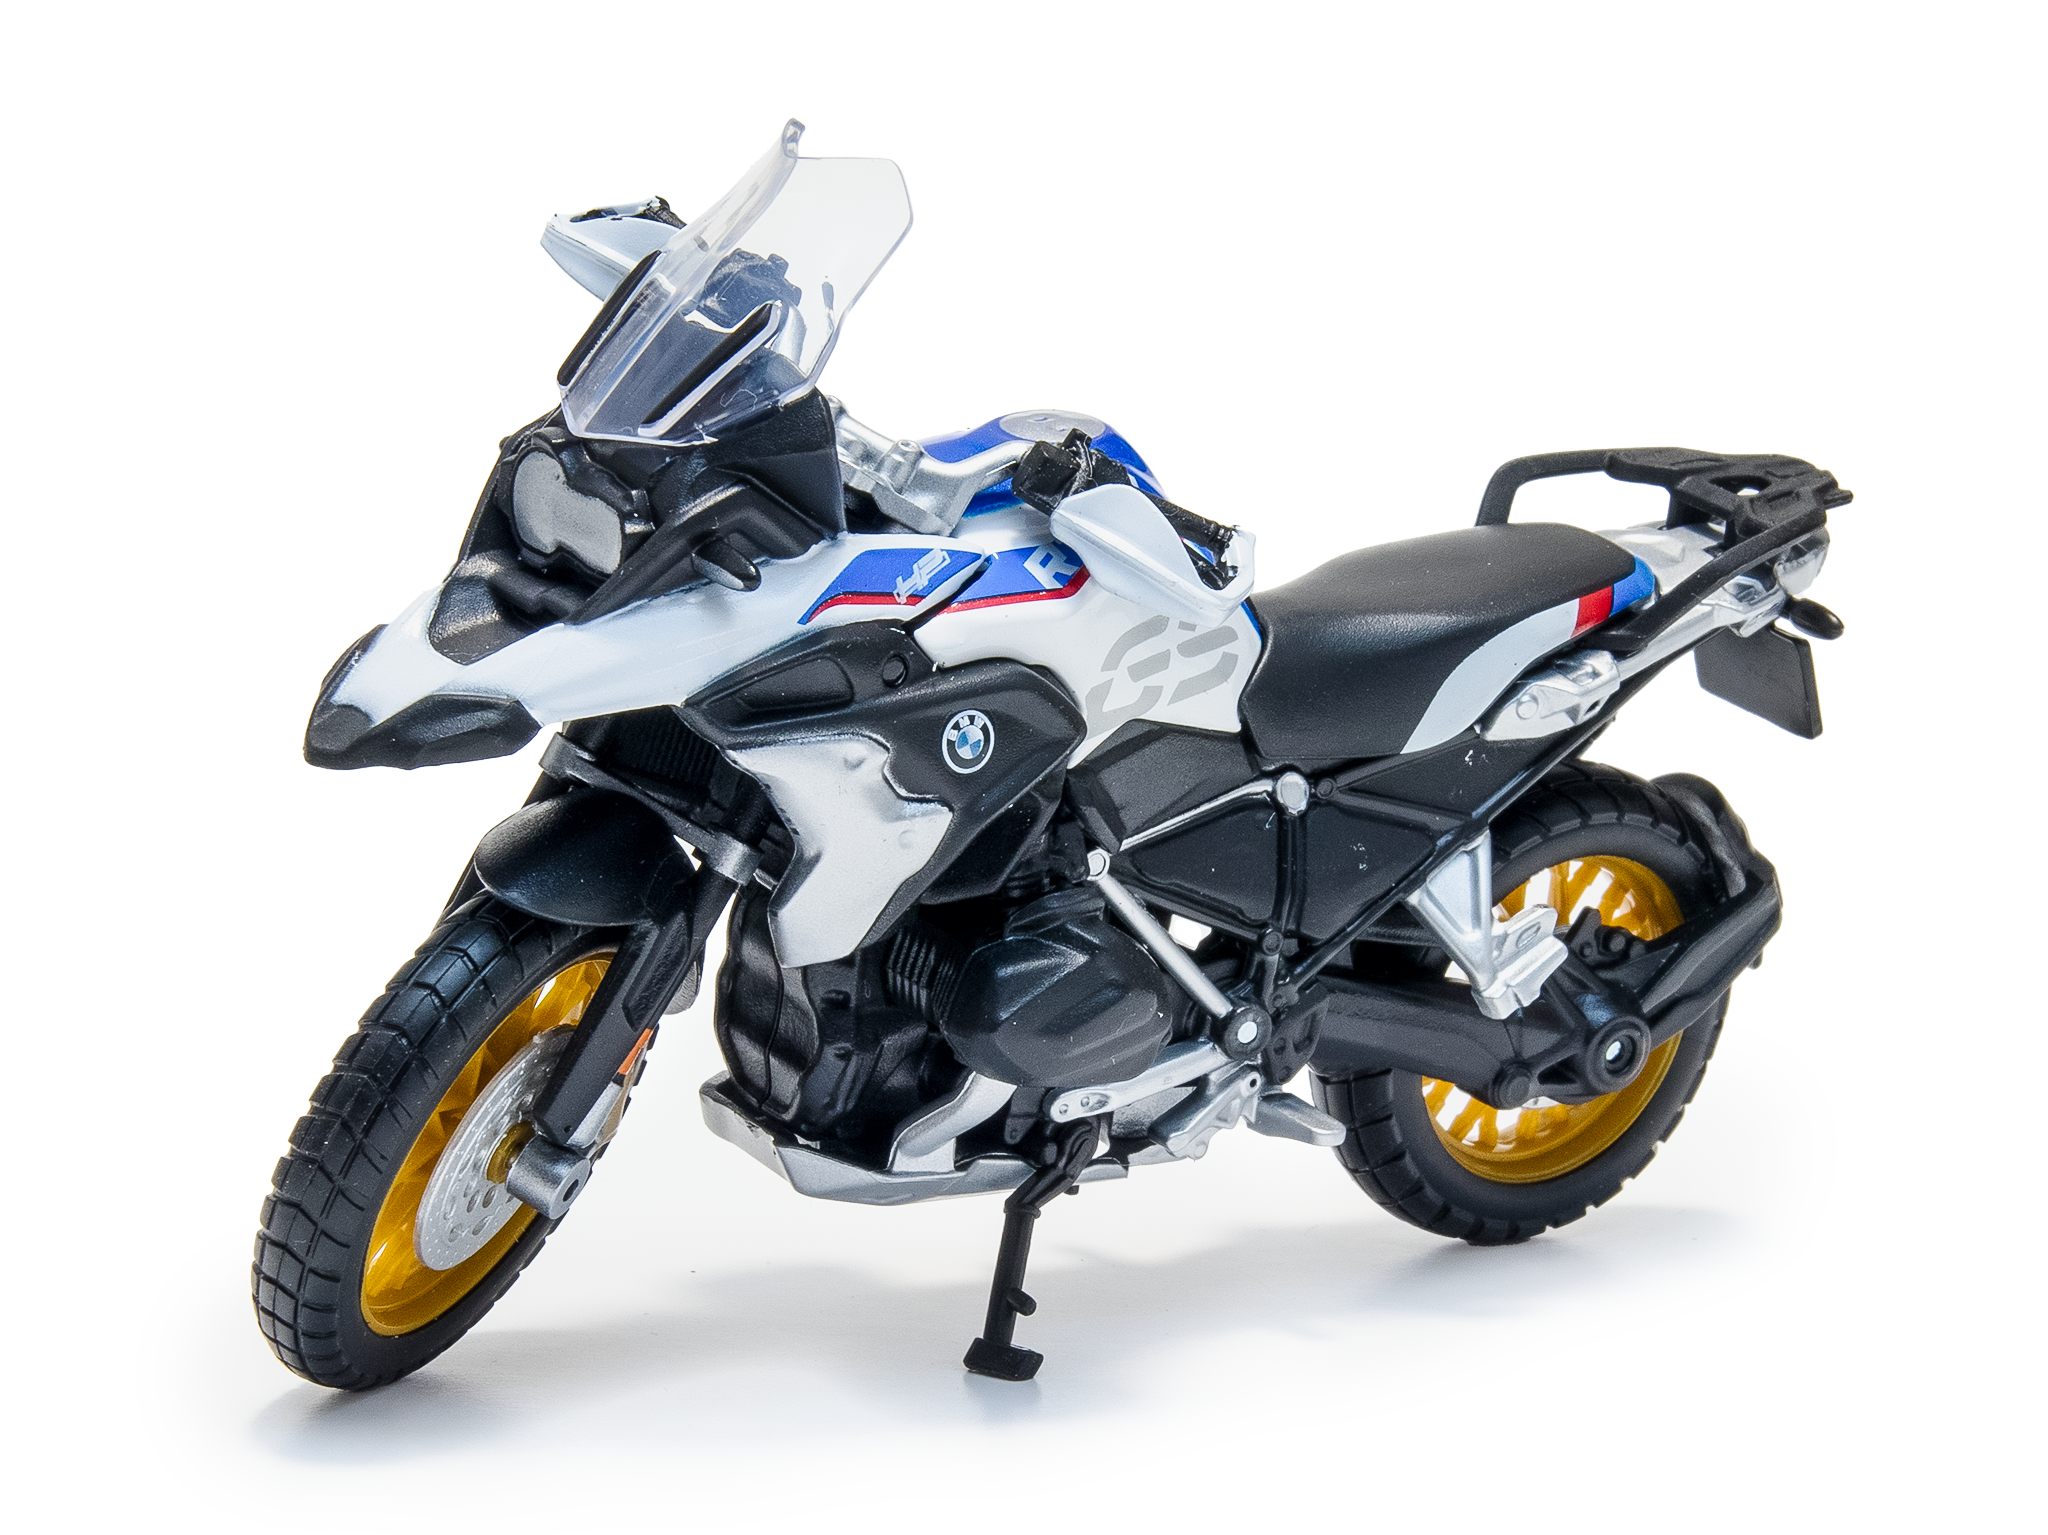 BMW R 1250 GS 2020 white - 1:18 Scale Diecast Model Motorcycle